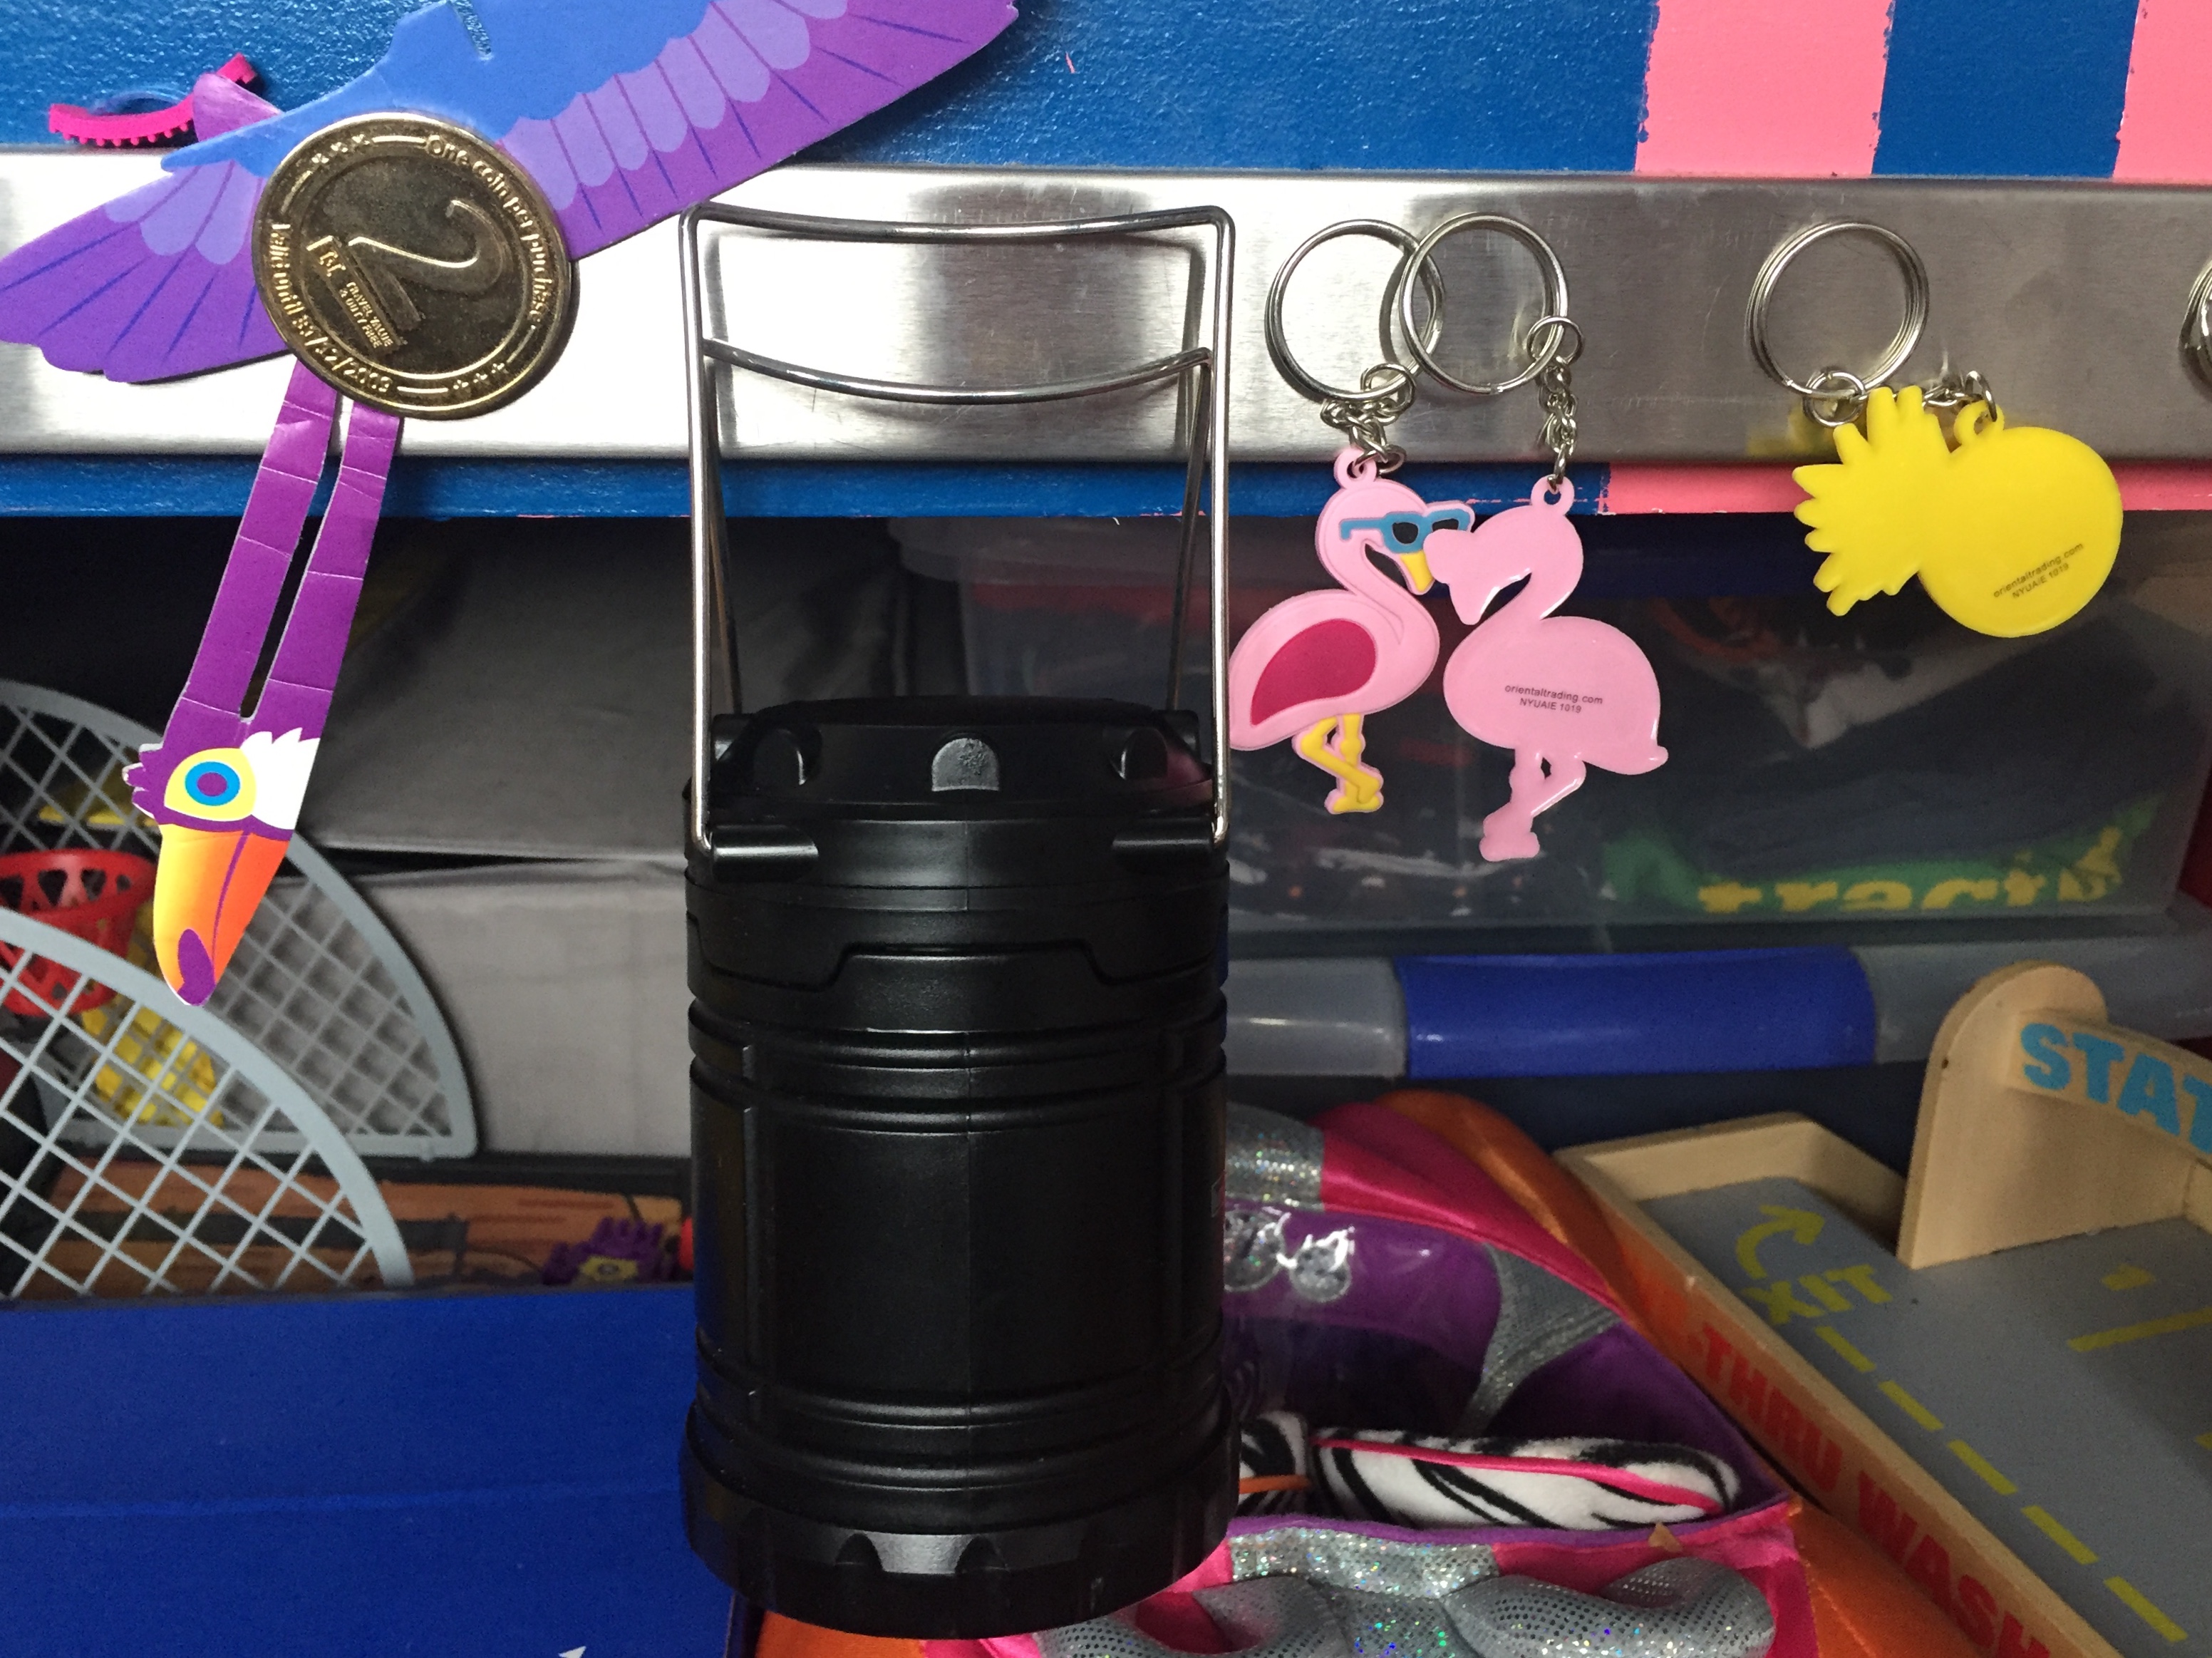 Magnetic knife rack attached to side of child's bed holding pretend coin money, lantern, key chains